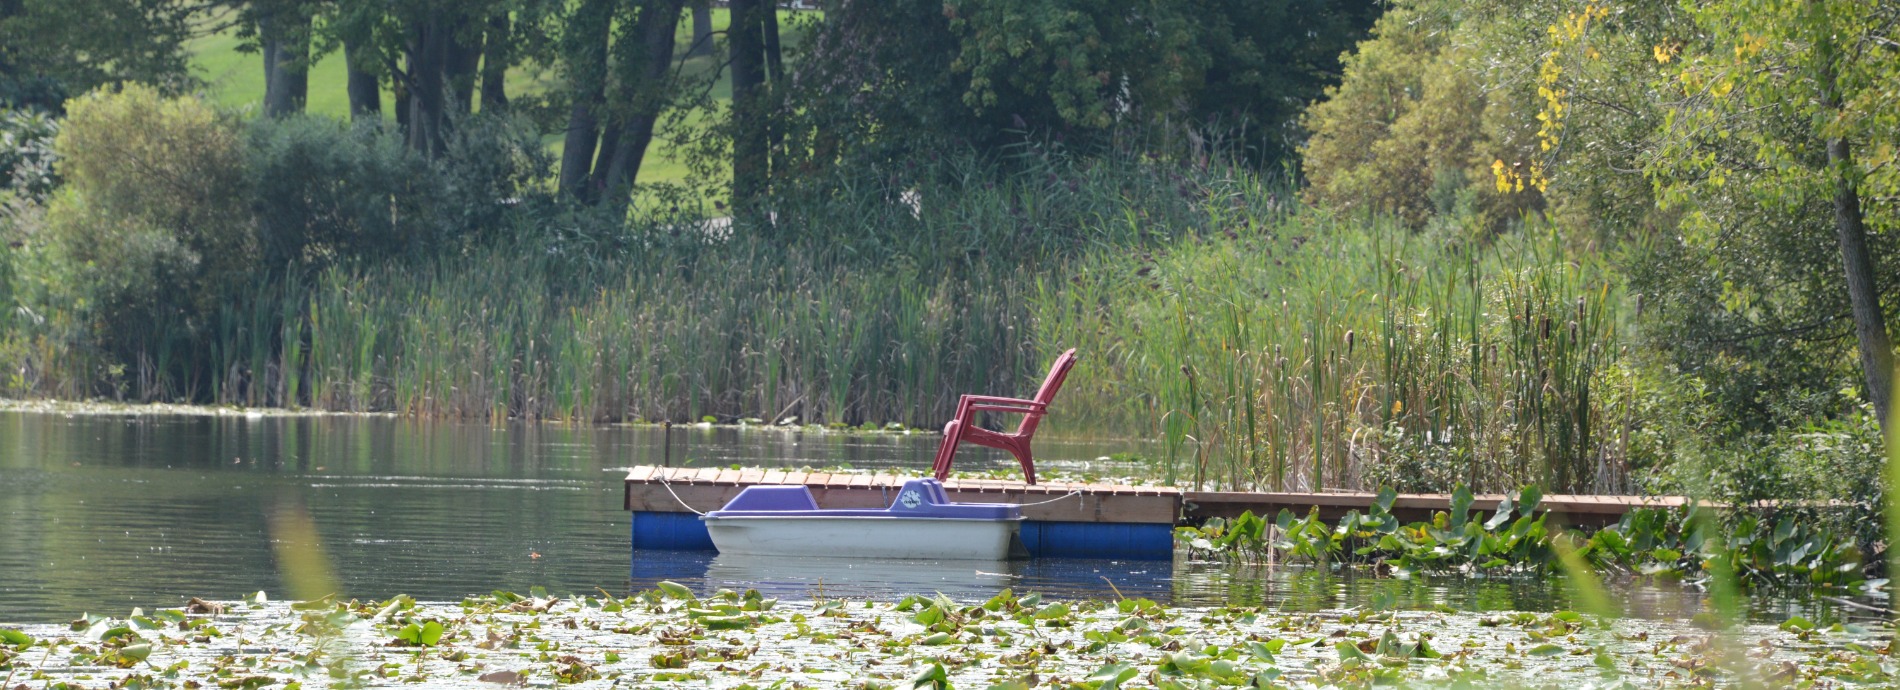 red chair on a dock